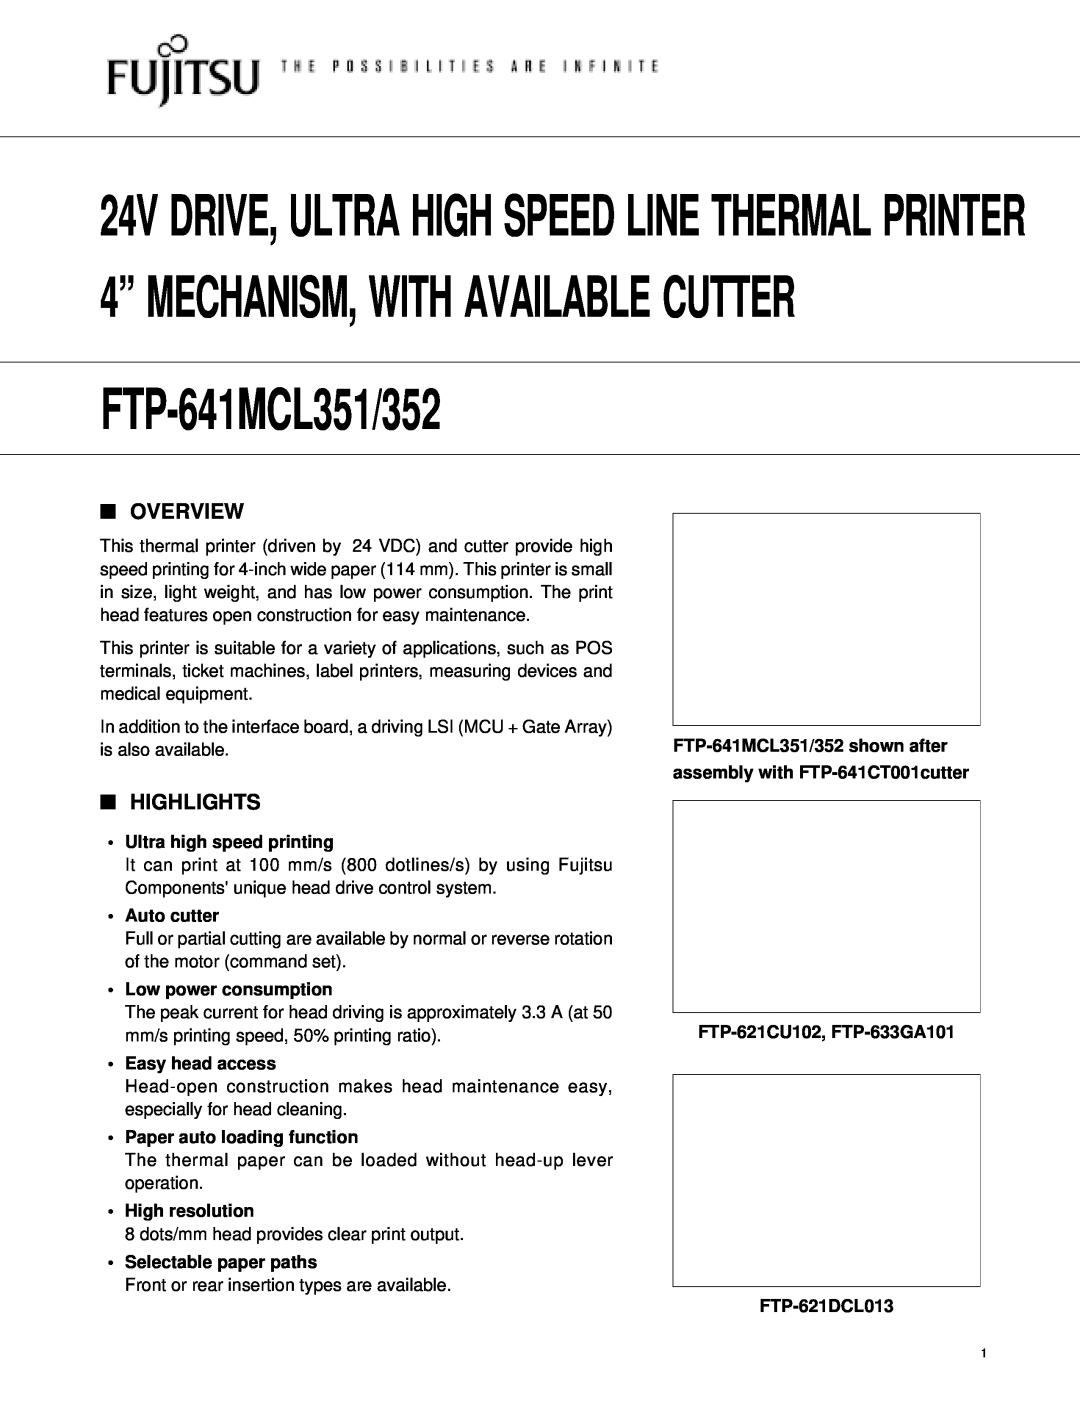 Fujitsu FTP-641MCL351 manual Overview, Highlights, Ultra high speed printing, Auto cutter, Low power consumption 